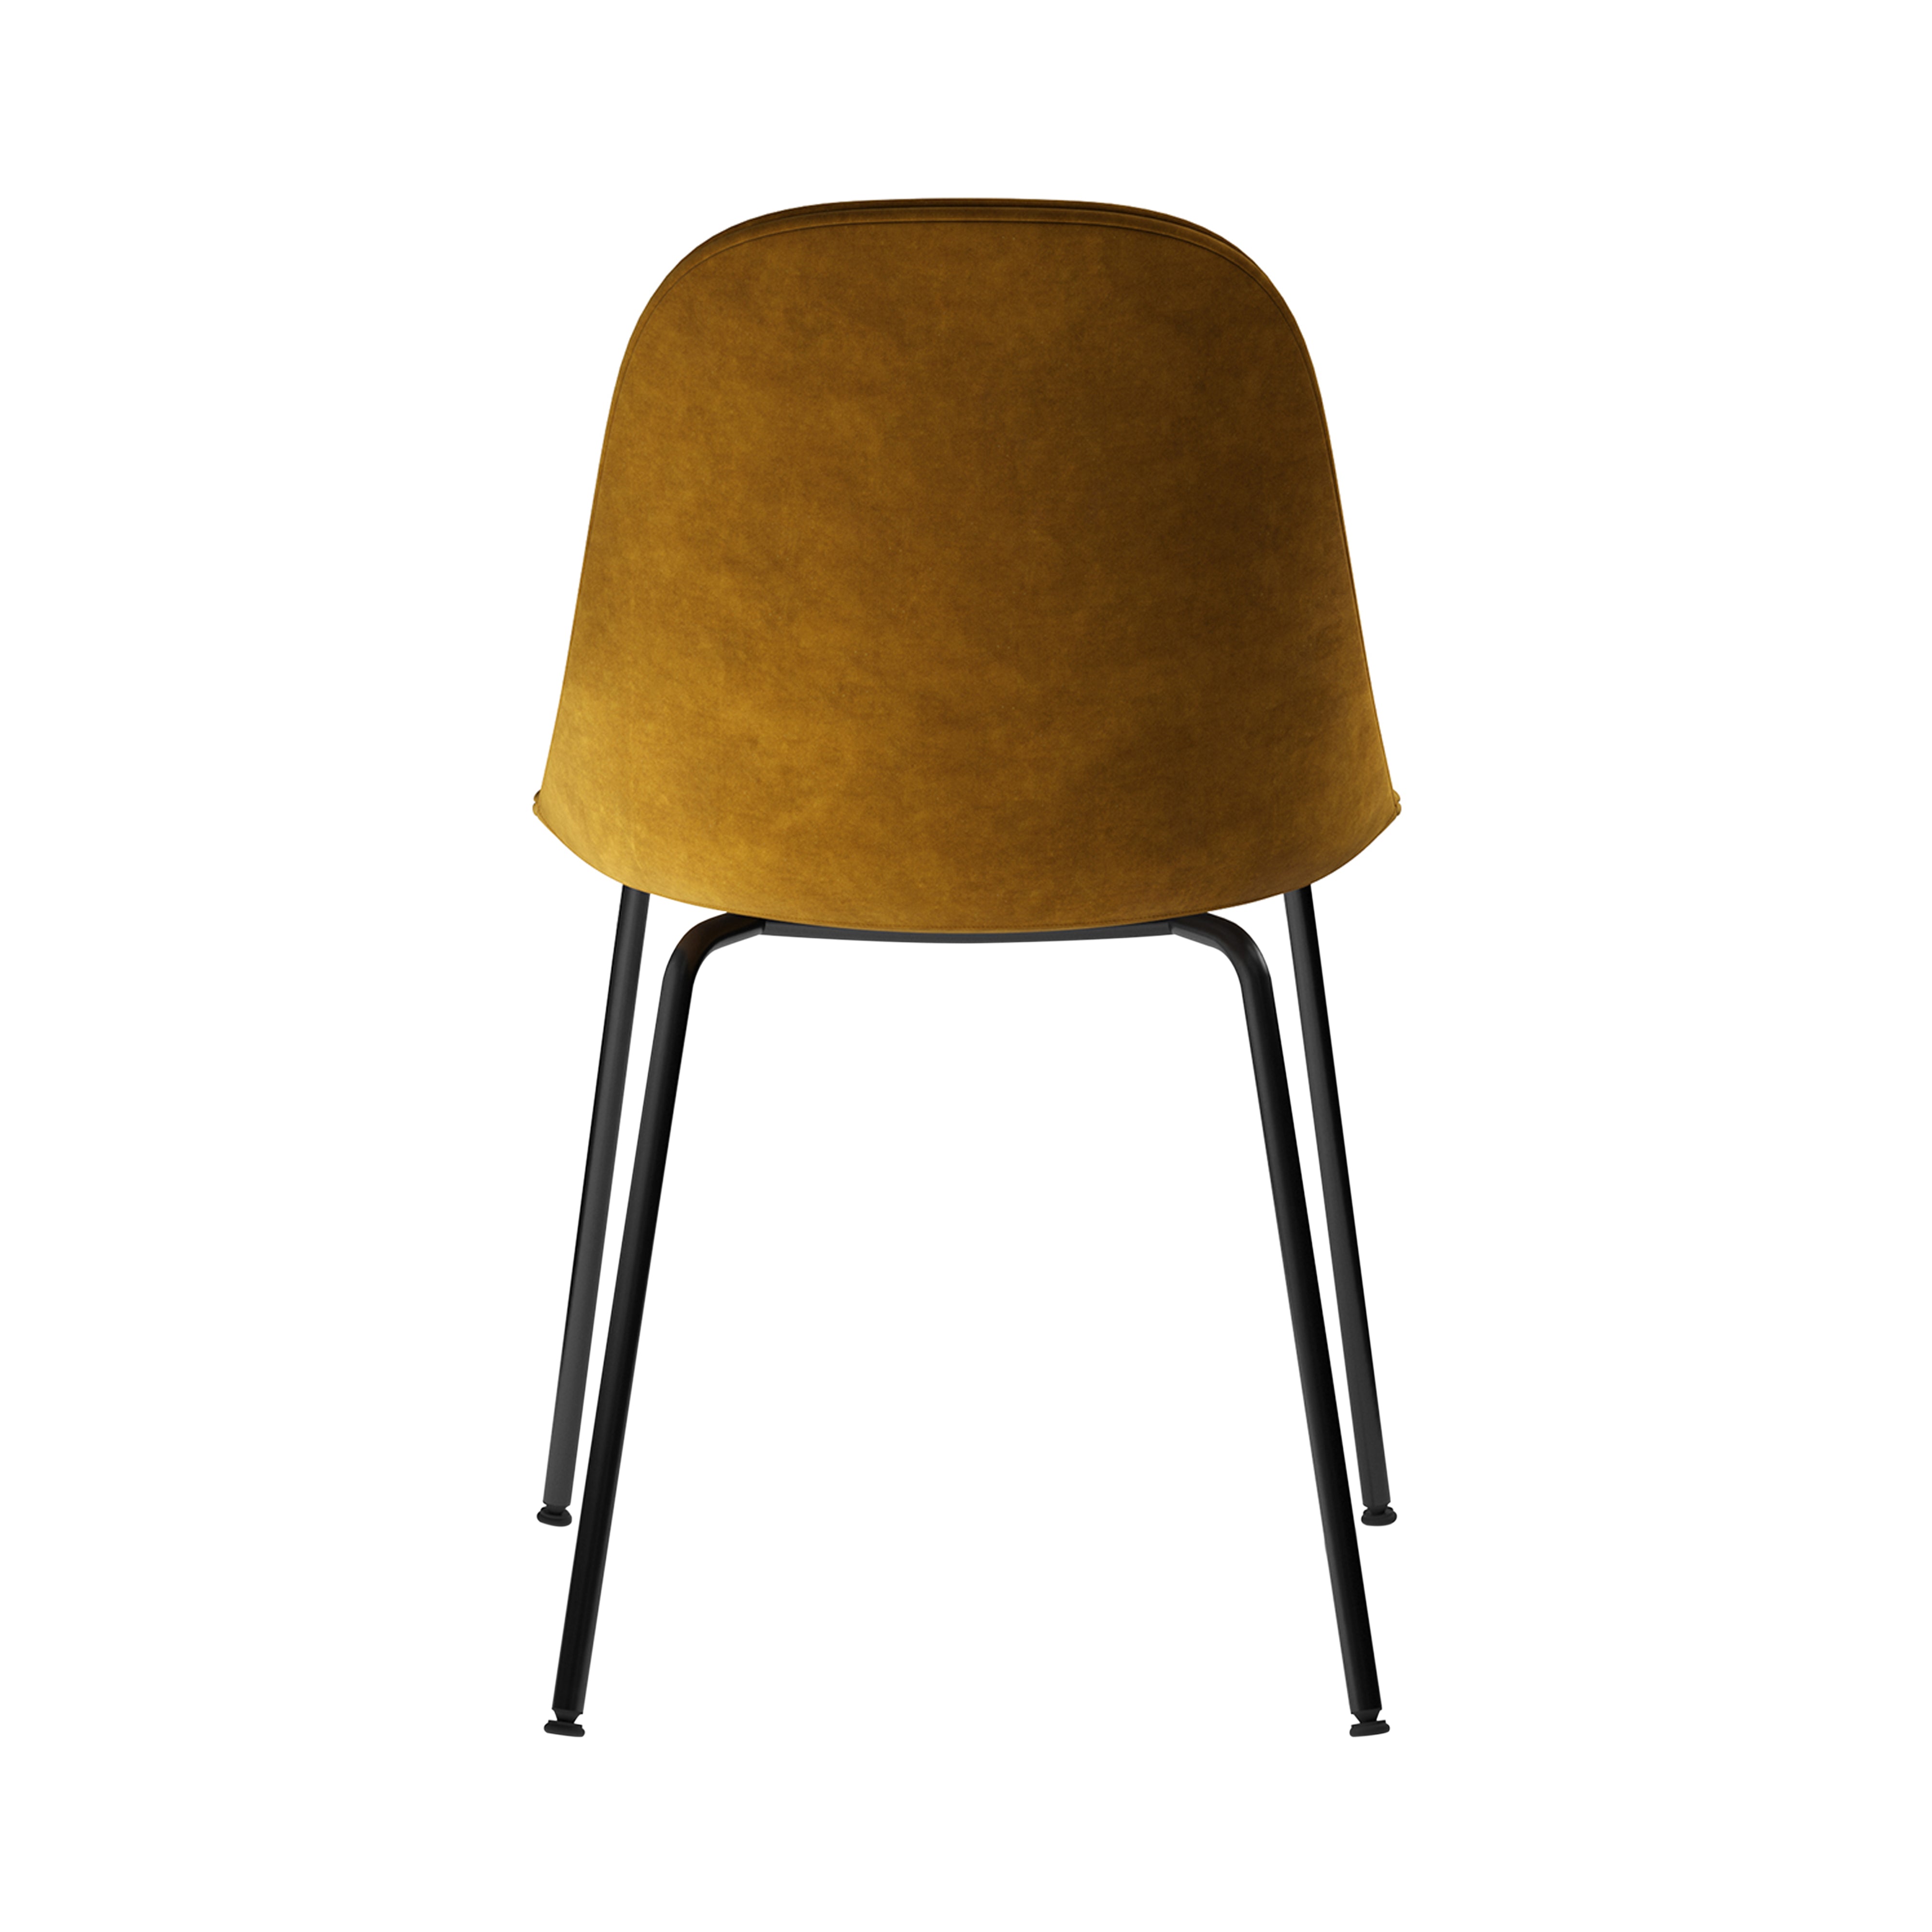 Harbour Side Chair: Steel Base Upholstered